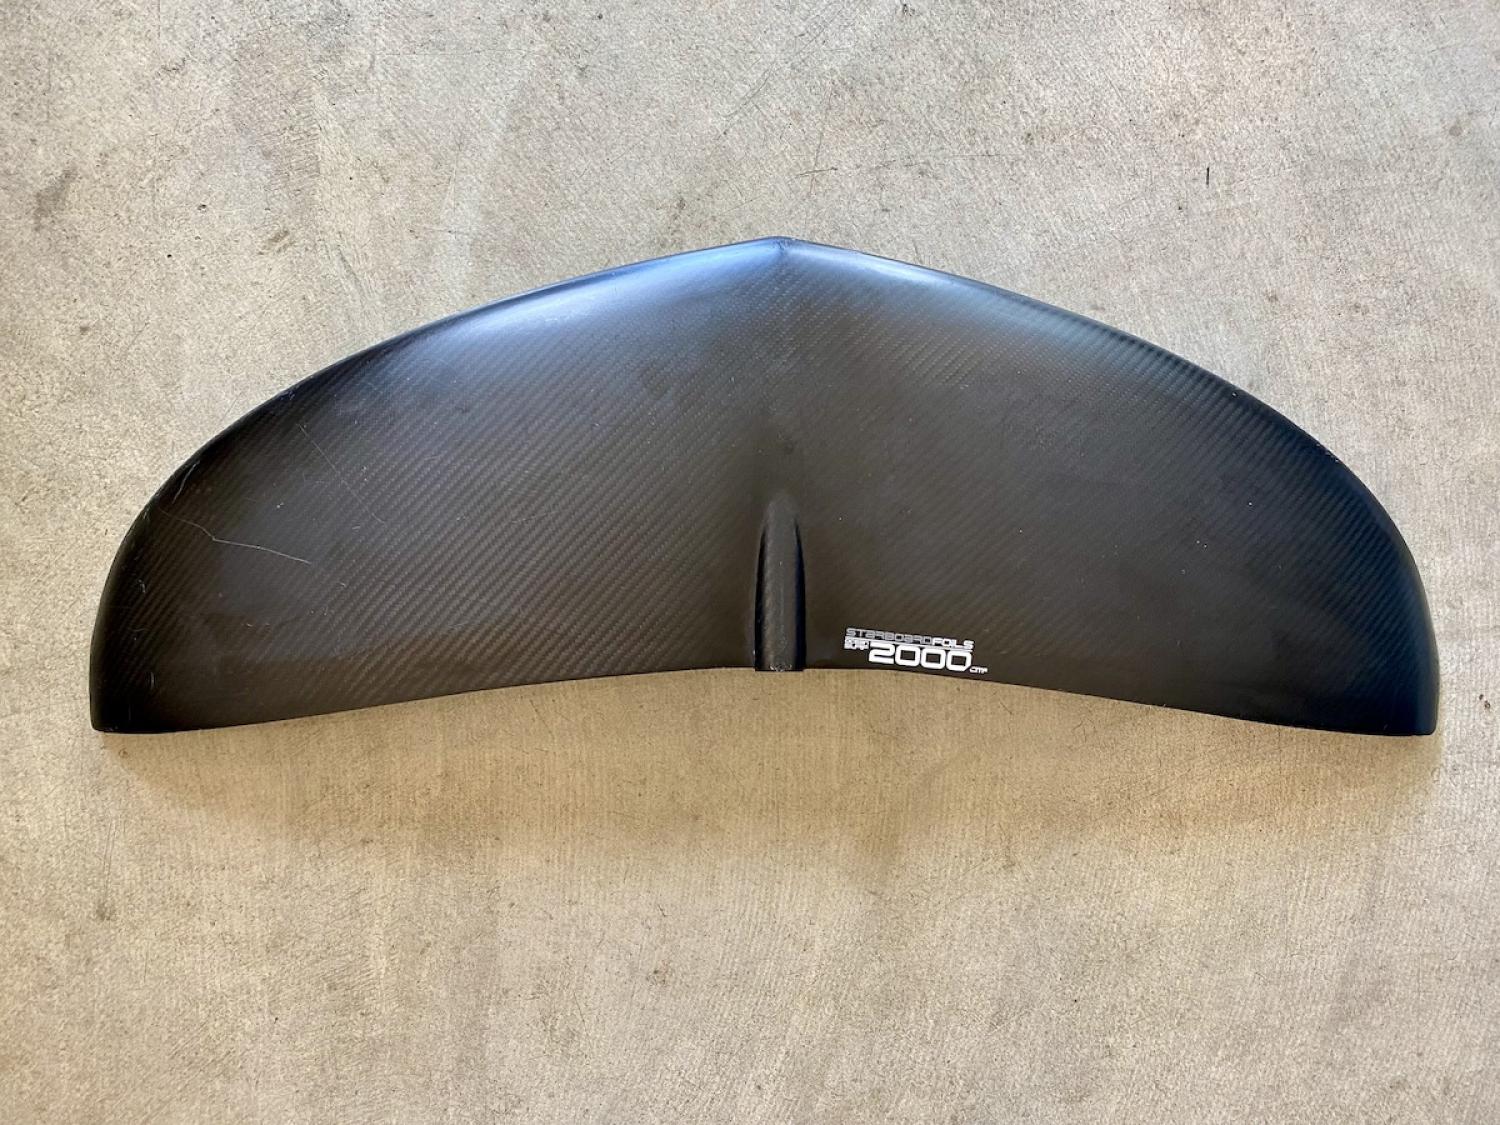 USED STARBOARD FRONT WING OCEAN SURF 2000 for Quick Lock HD